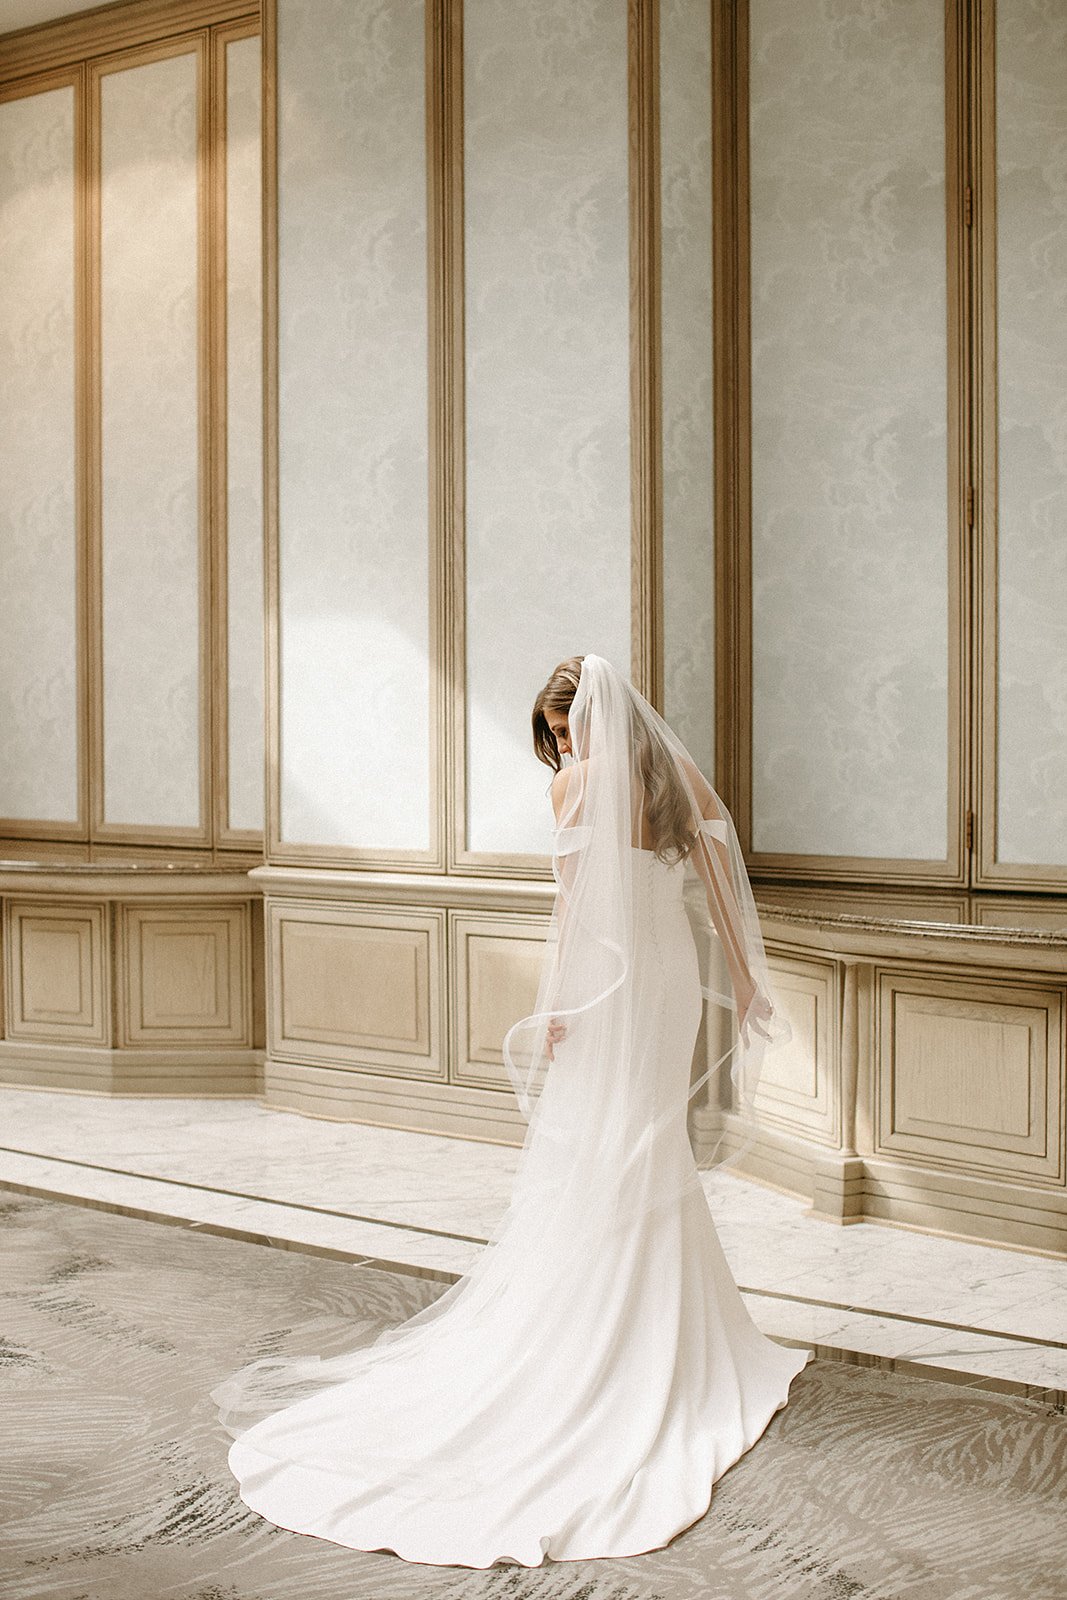  A bride wearing the Julianne Veil by Sara Gabriel and the Camila wedding dress by Alyssa Kristin in the lobby of the Four Seasons Hotel in Dallas, Texas 